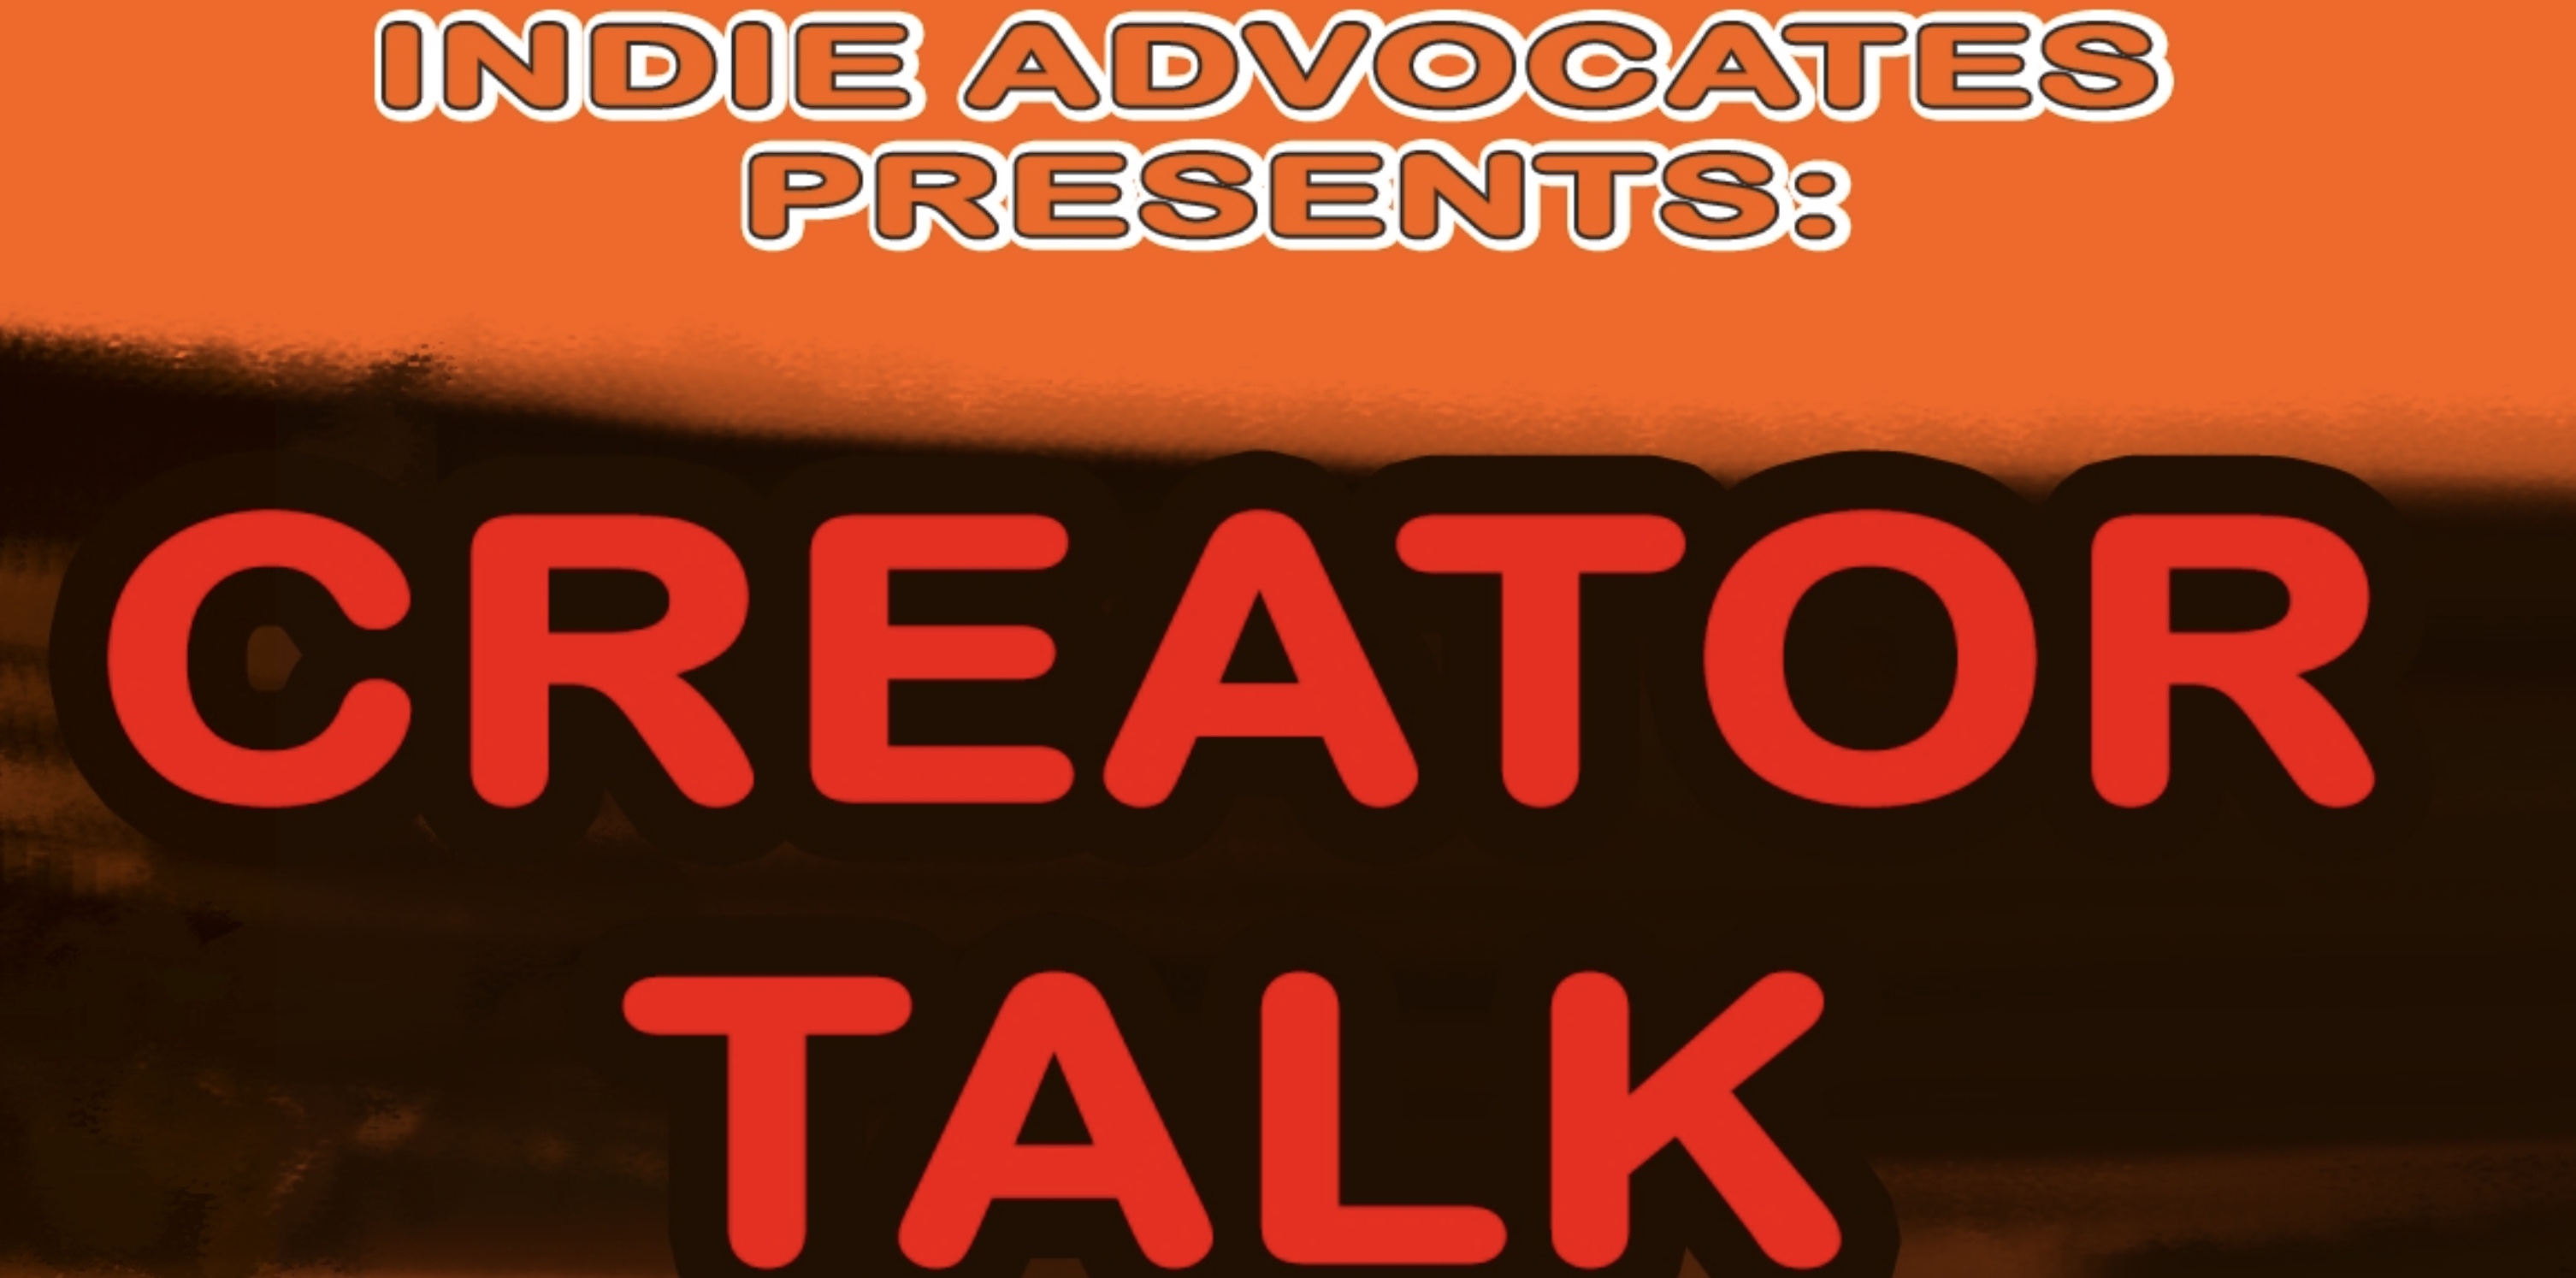 THIS IS CREATOR TALK HOSTED BY Chuck Pineau FEATURING: Travis Gibb and Rob Andersin.